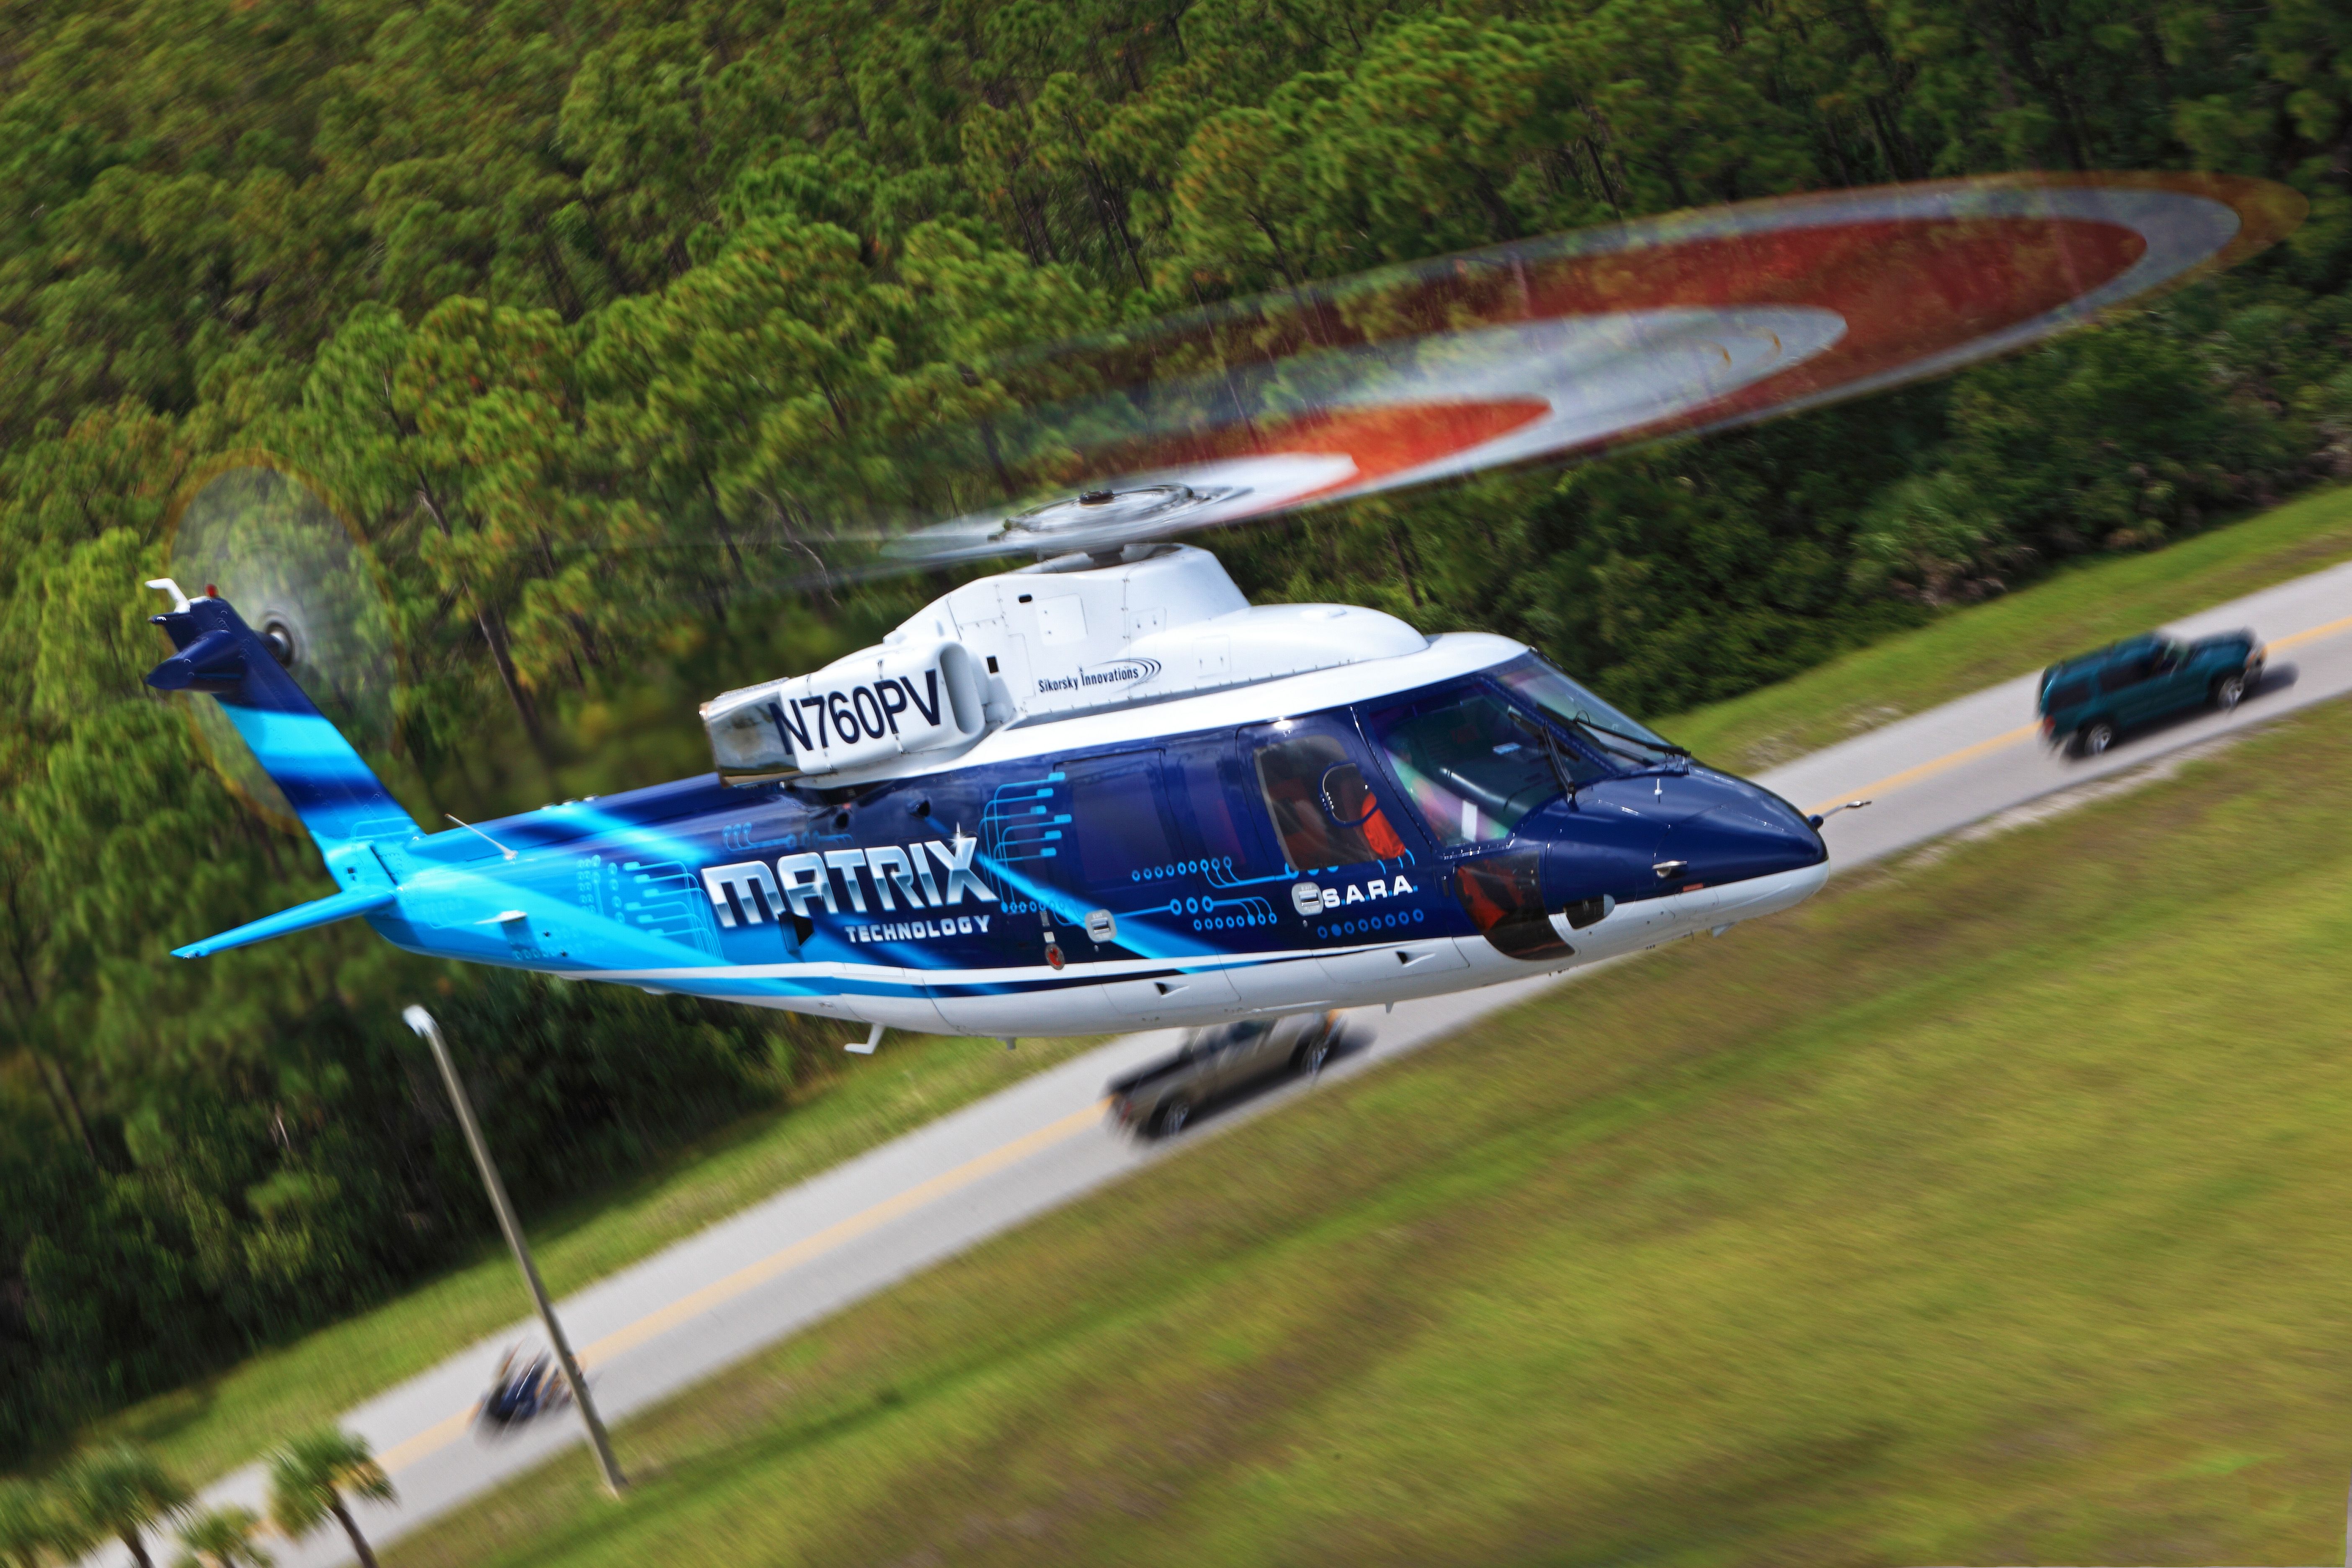 Sikorsky Successfully Tests Autonomous Helicopter Flight For Darpa